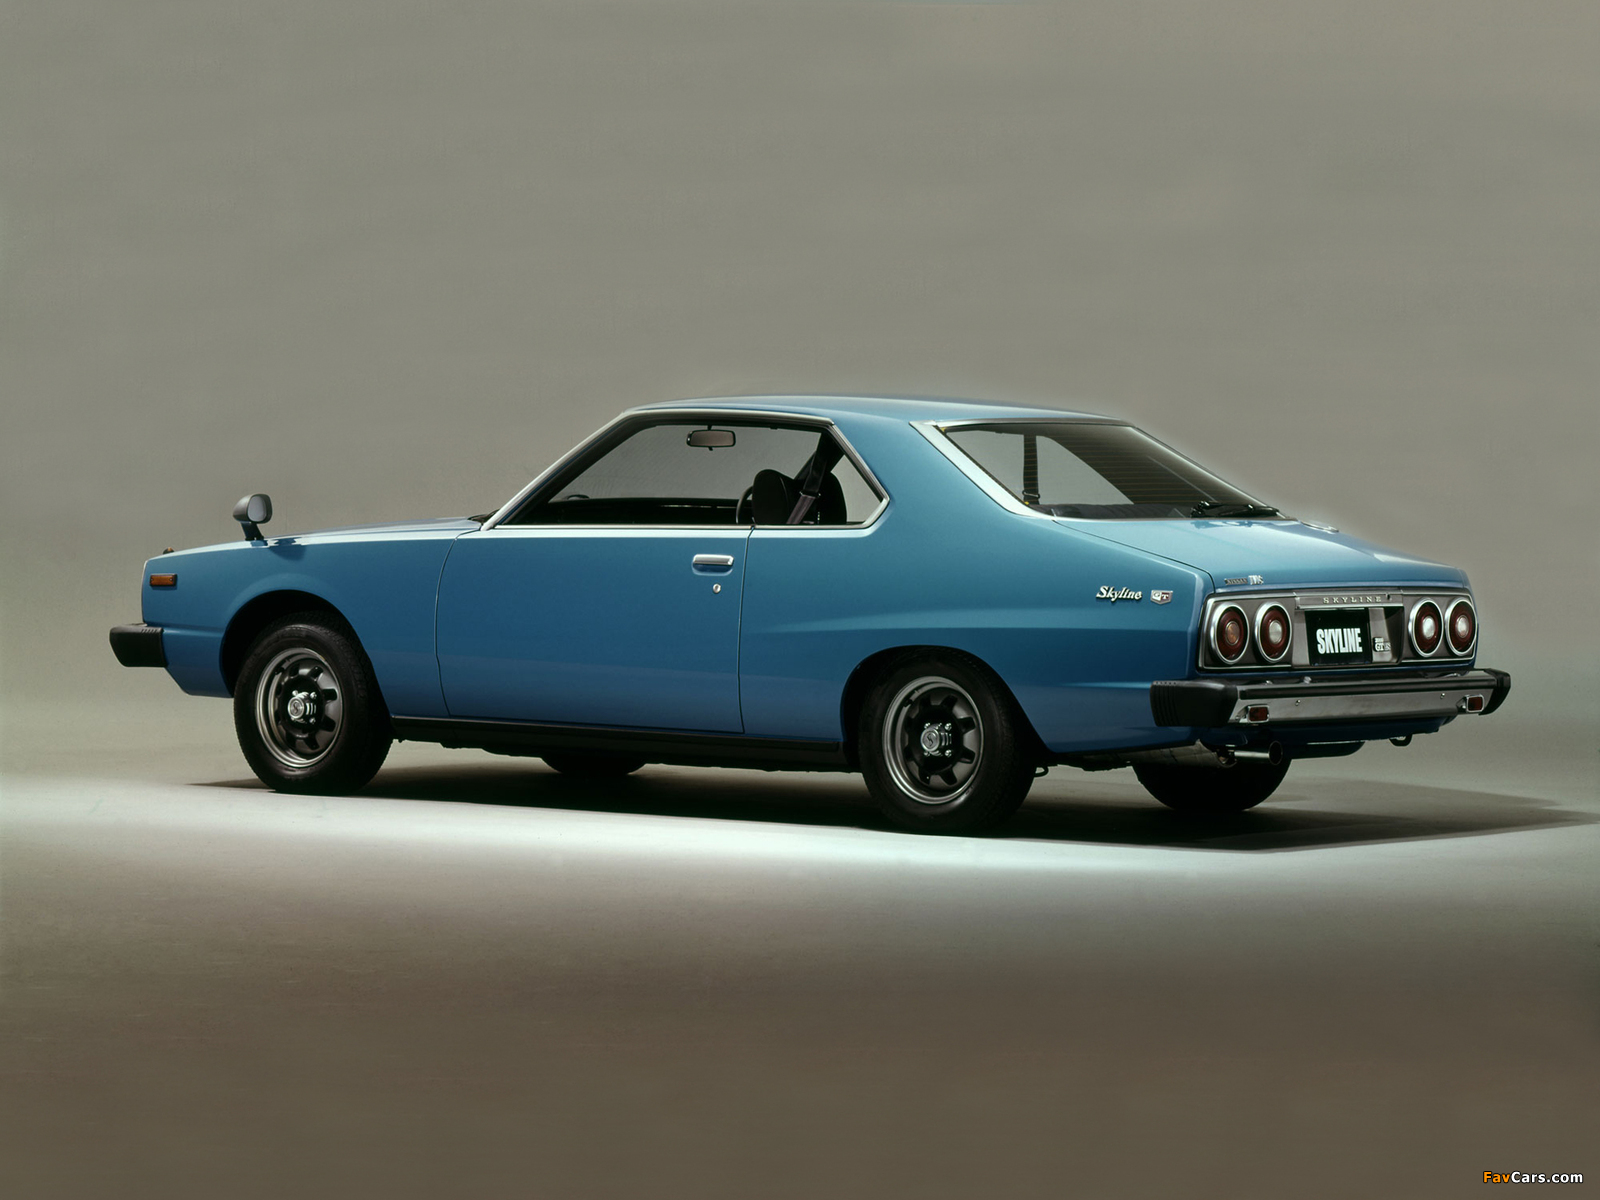 Nissan Skyline 2000GT Coupe (C210) 1977–79 pictures (1600 x 1200)